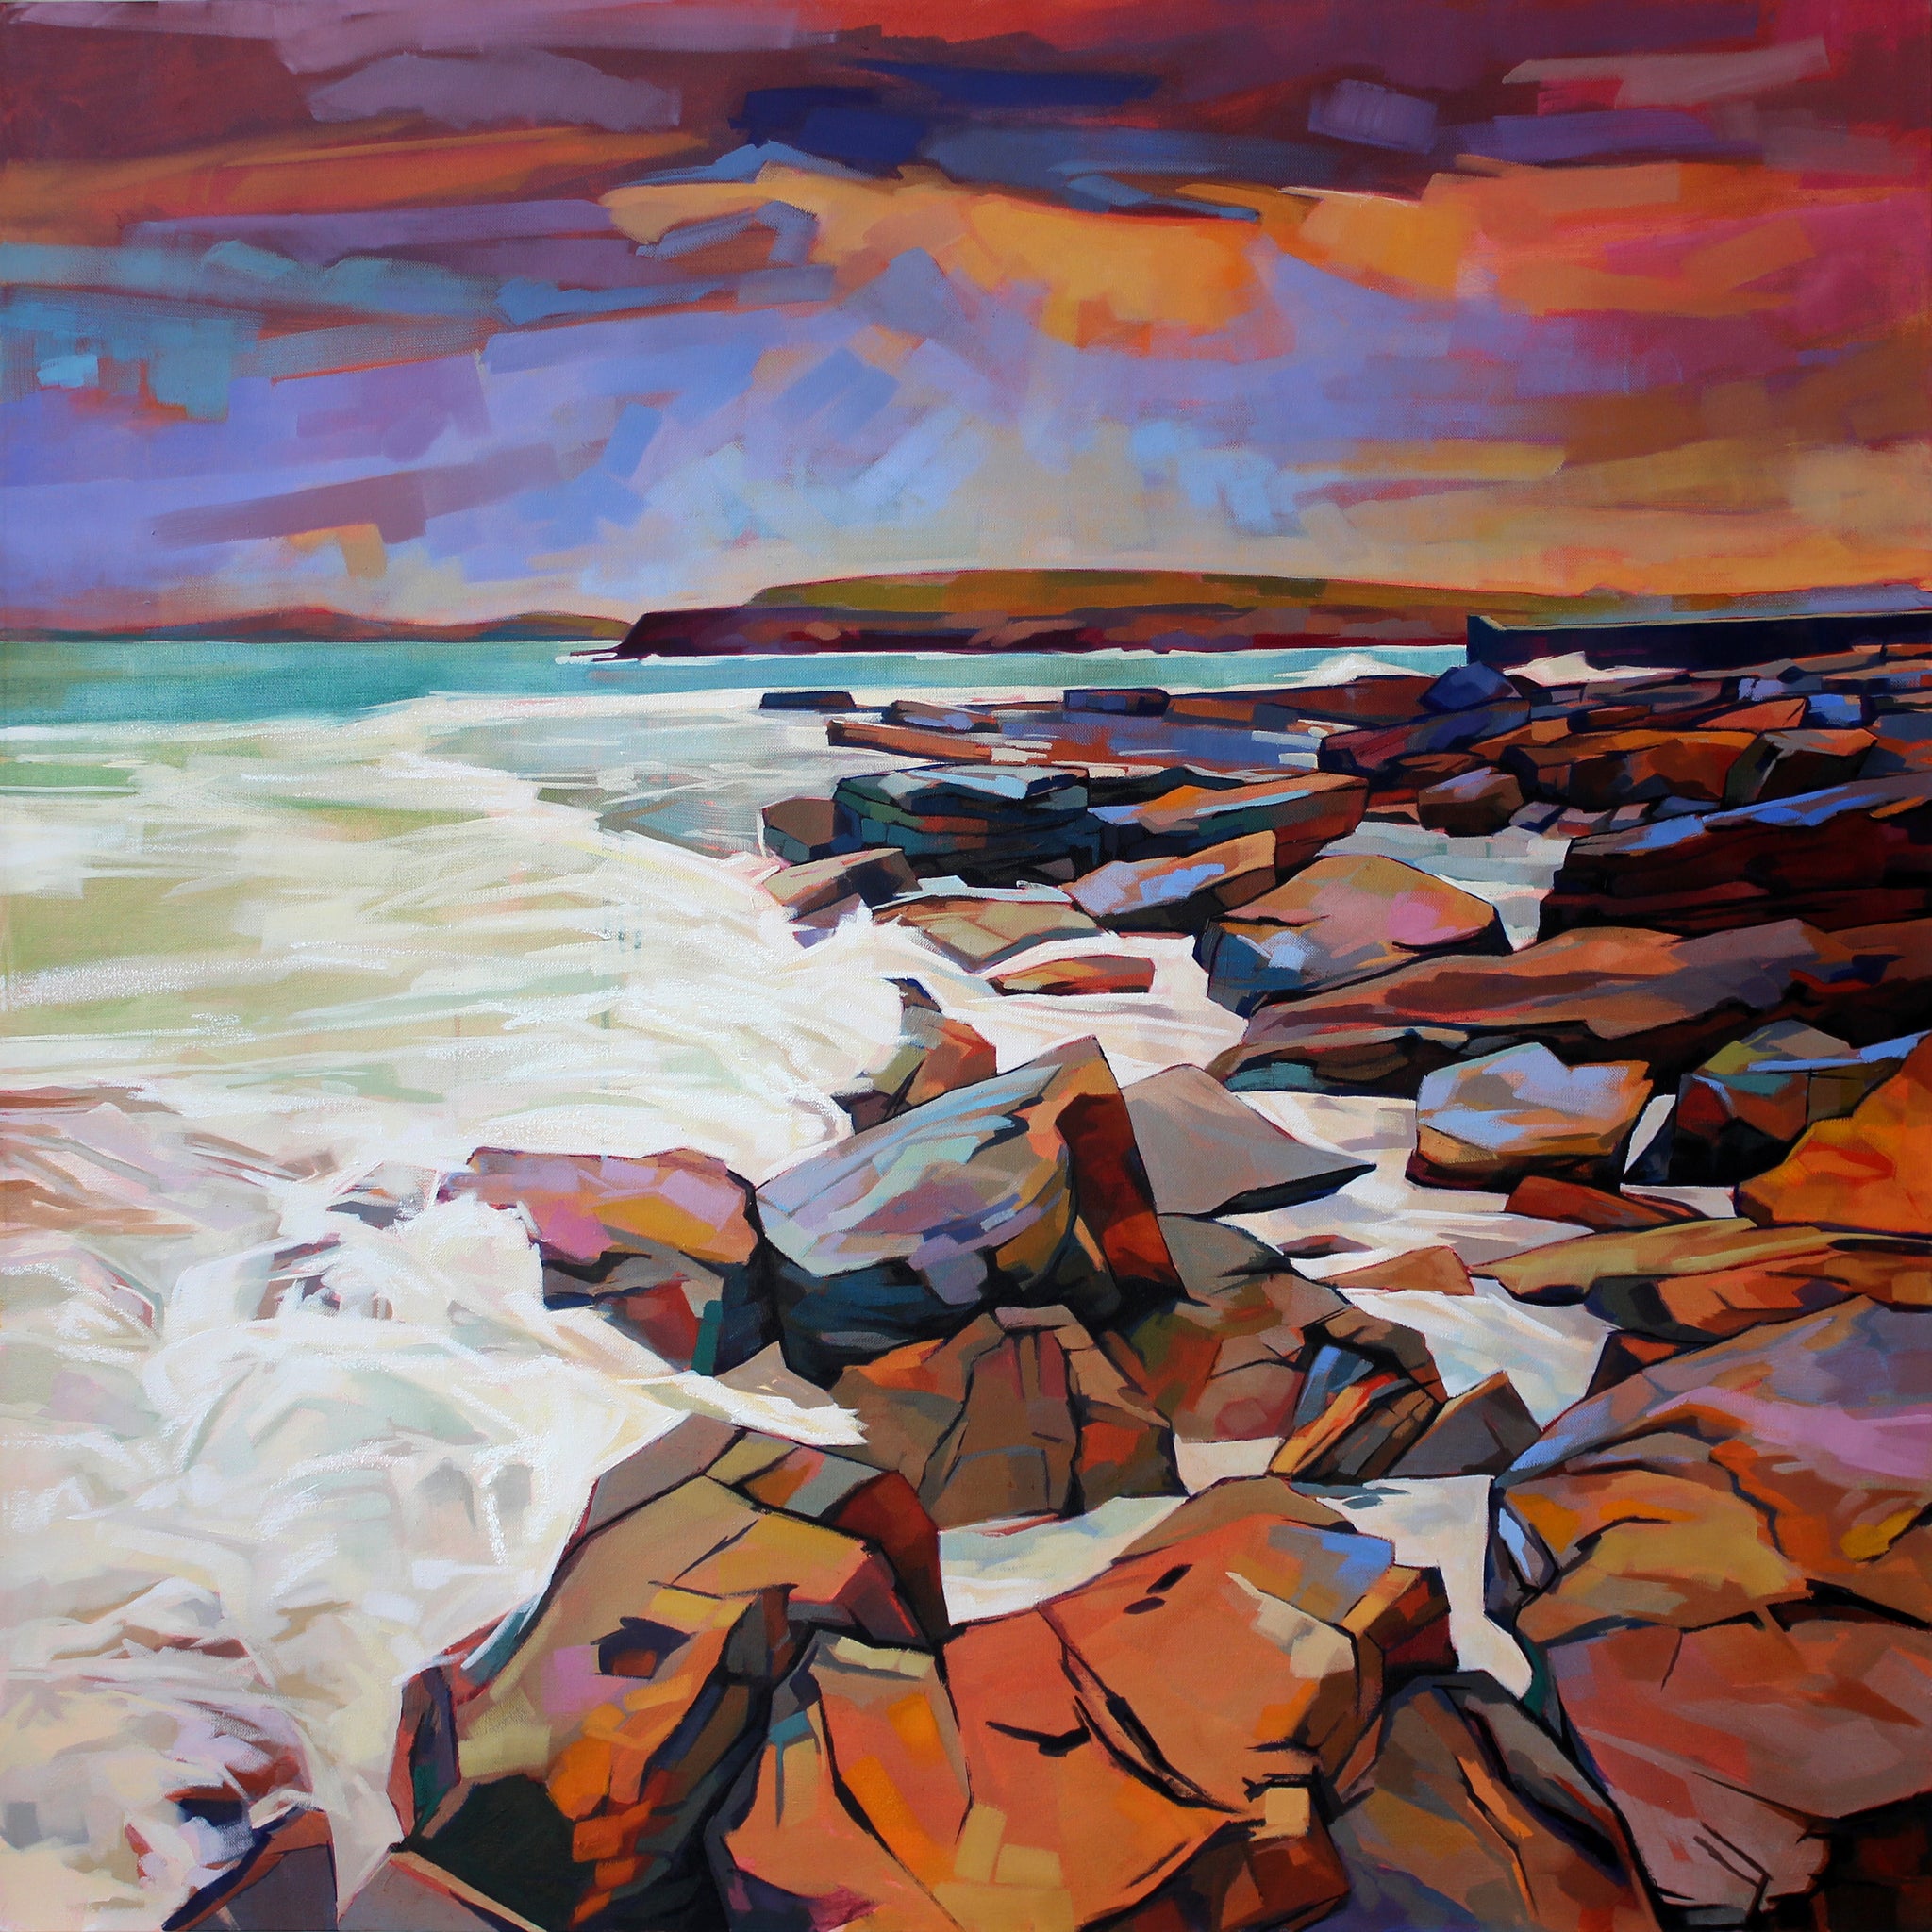 Rocks At Creevy - Contemporary art from Ireland. Paintings & prints by Irish seascape & landscape artist Kevin Lowery.